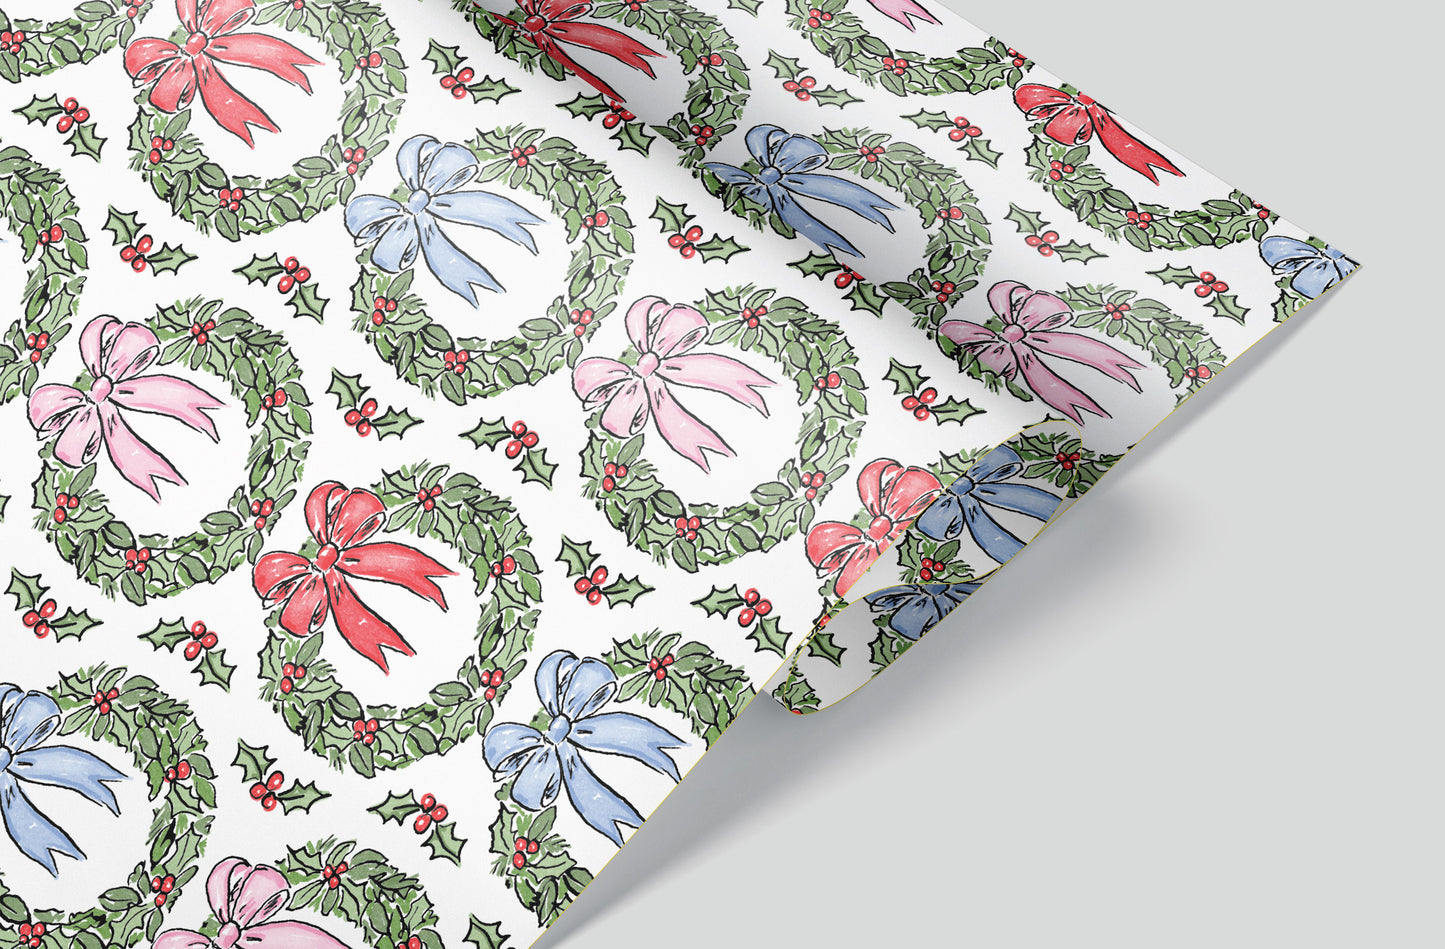 Ribbon Holly Multi Wreath Wrapping Paper Pre-Order